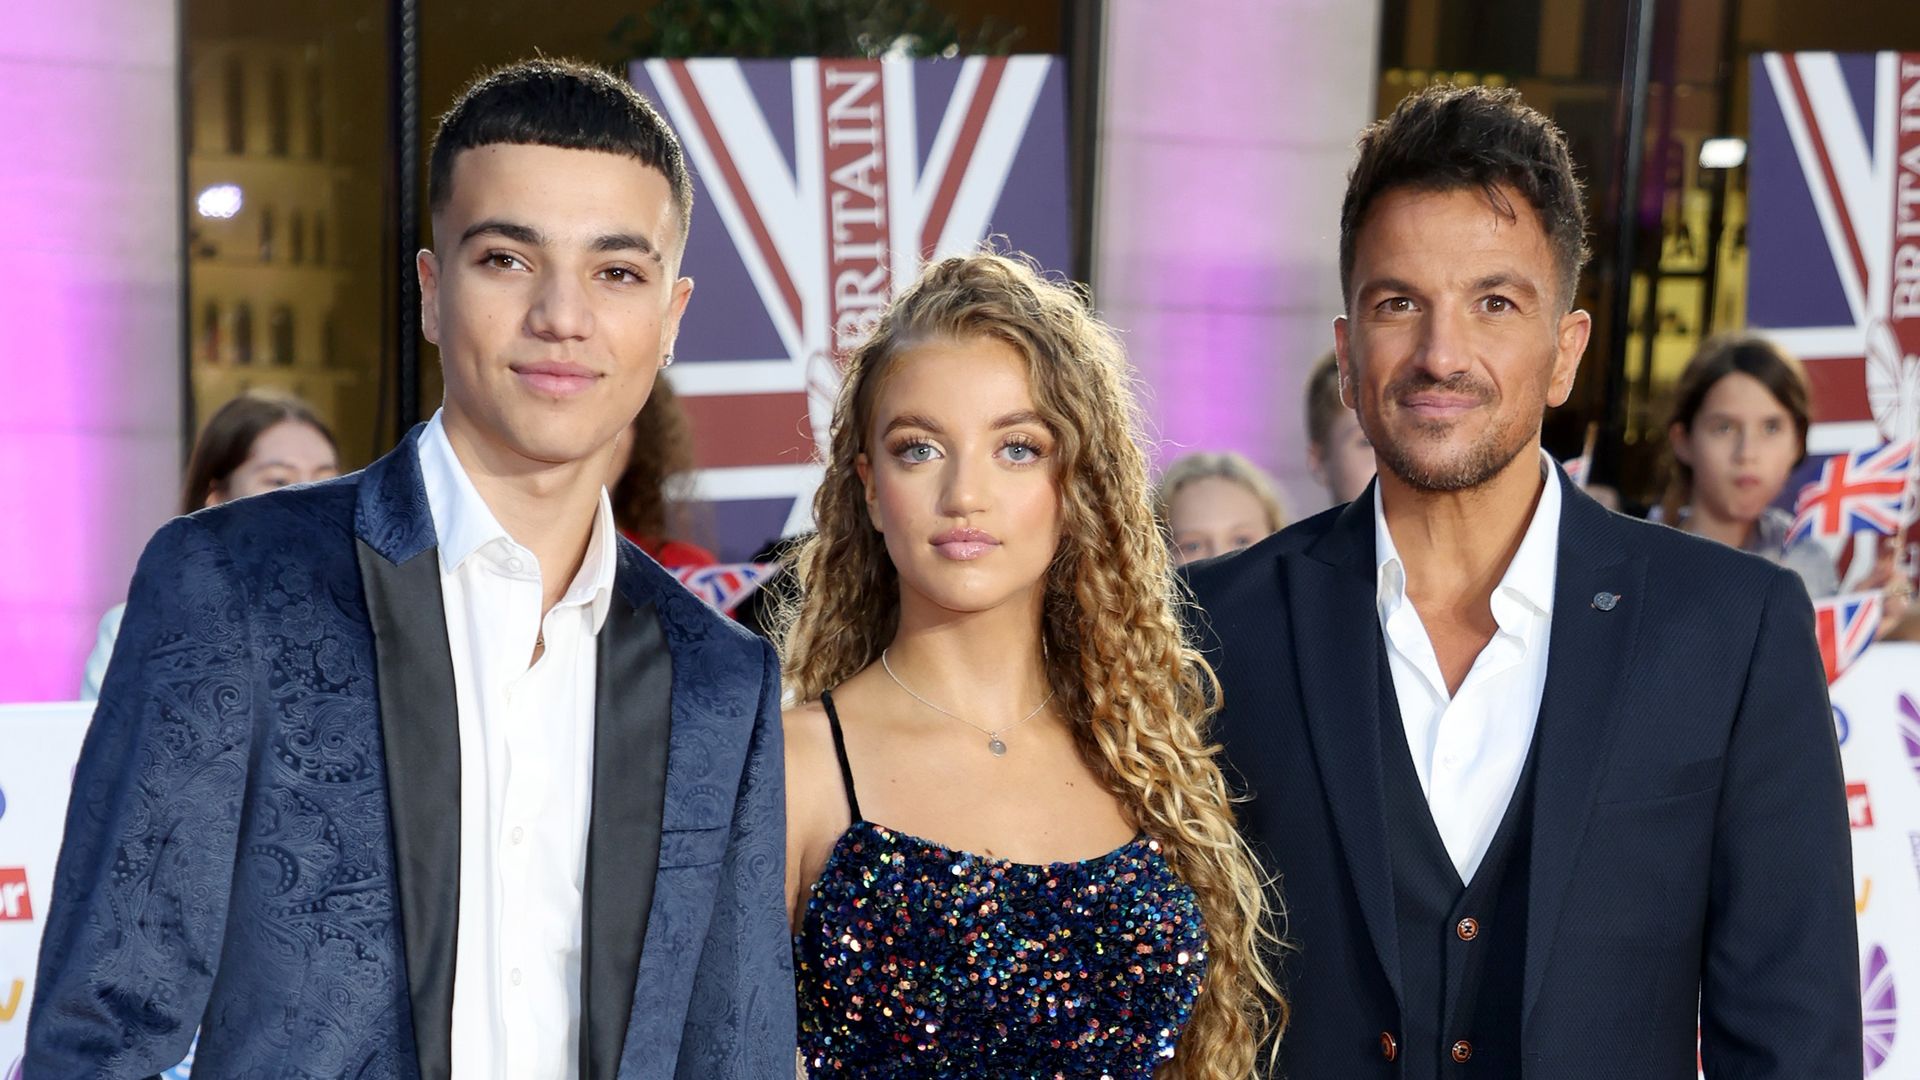 Junior Andre, Princess Andre and Peter Andre attend the Pride of Britain Awards 2022